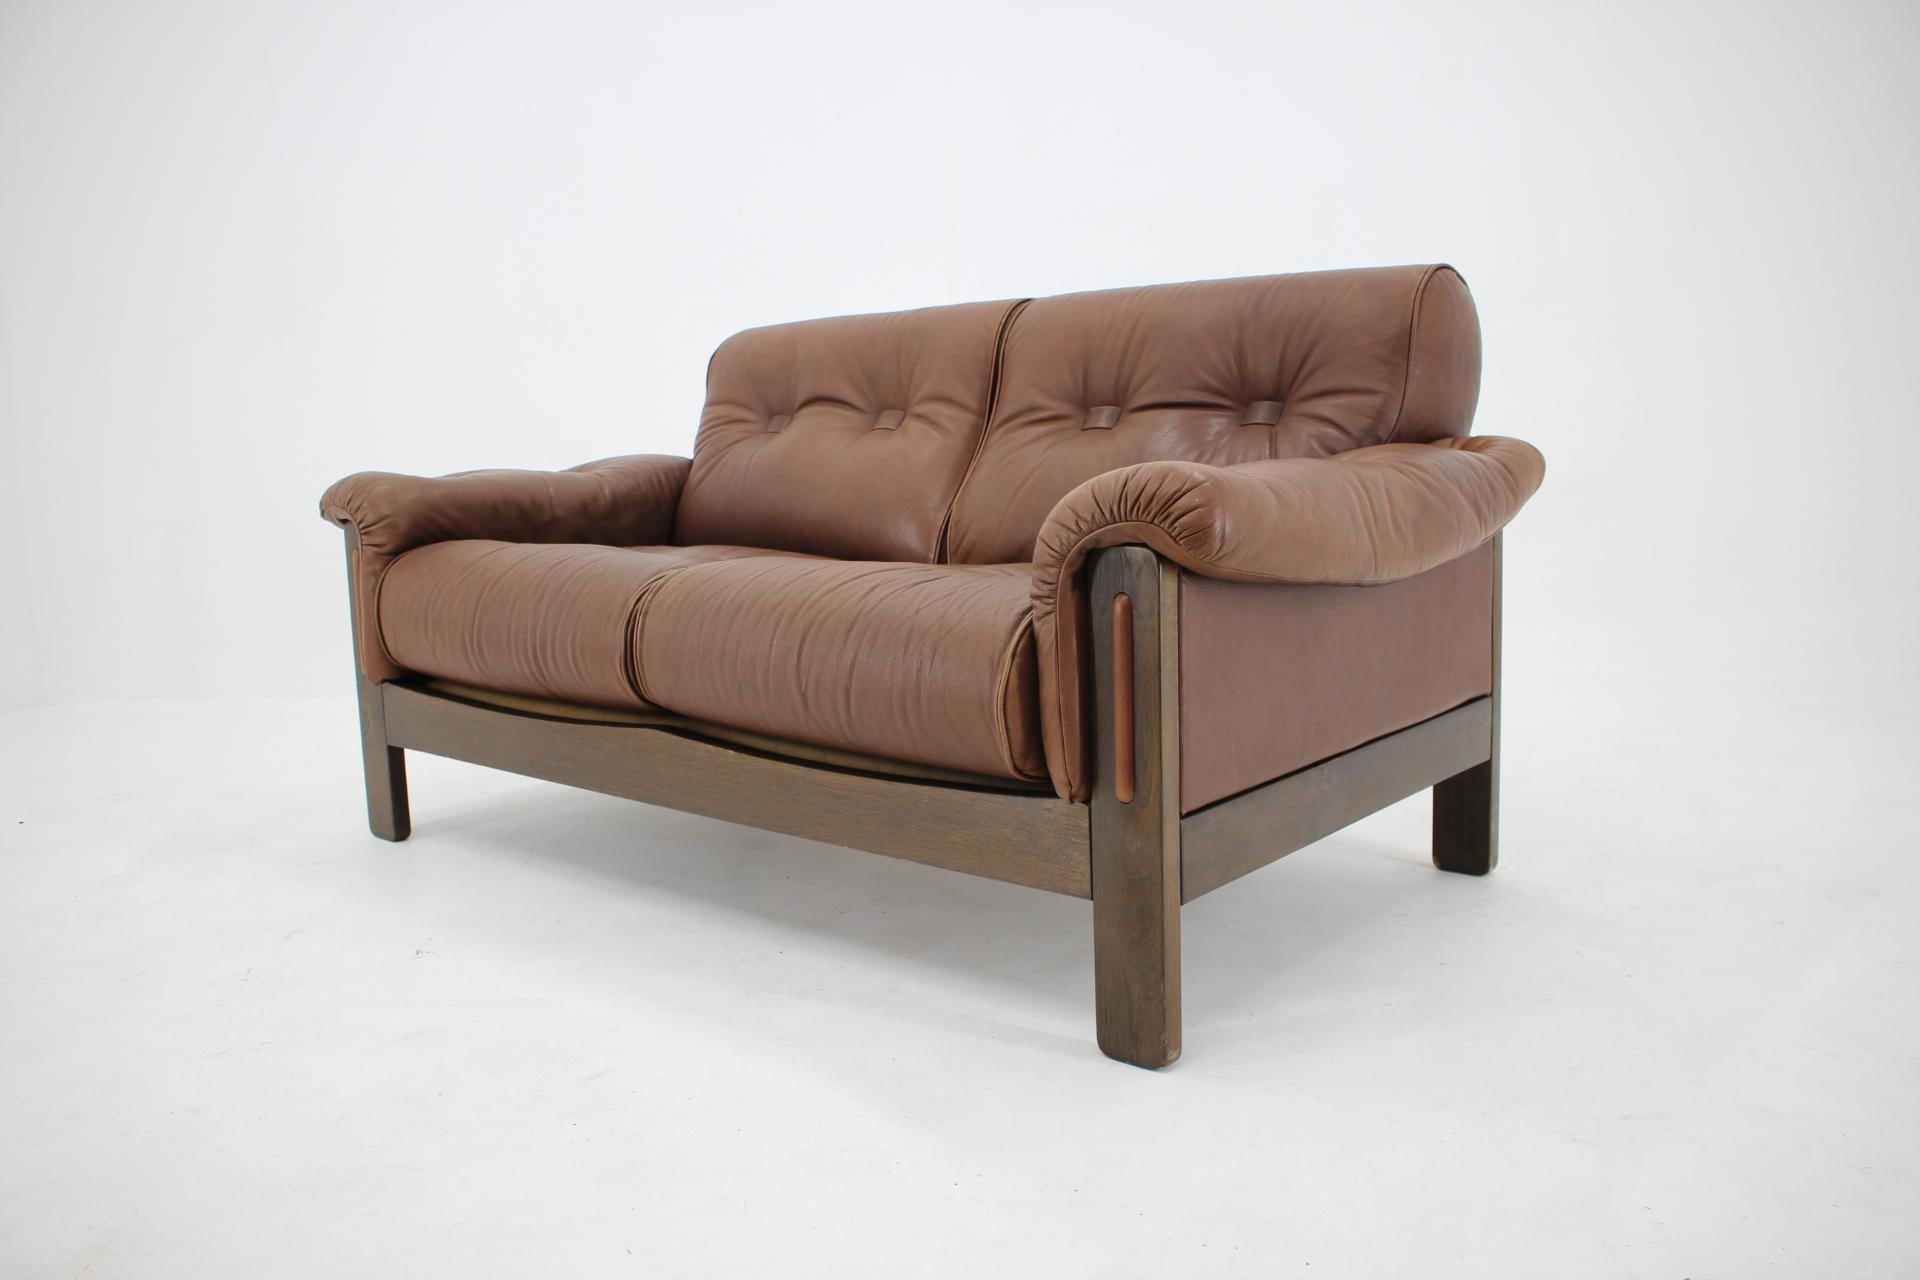 Wood 1970s Brown Leather 2-Seater Sofa, Denmark